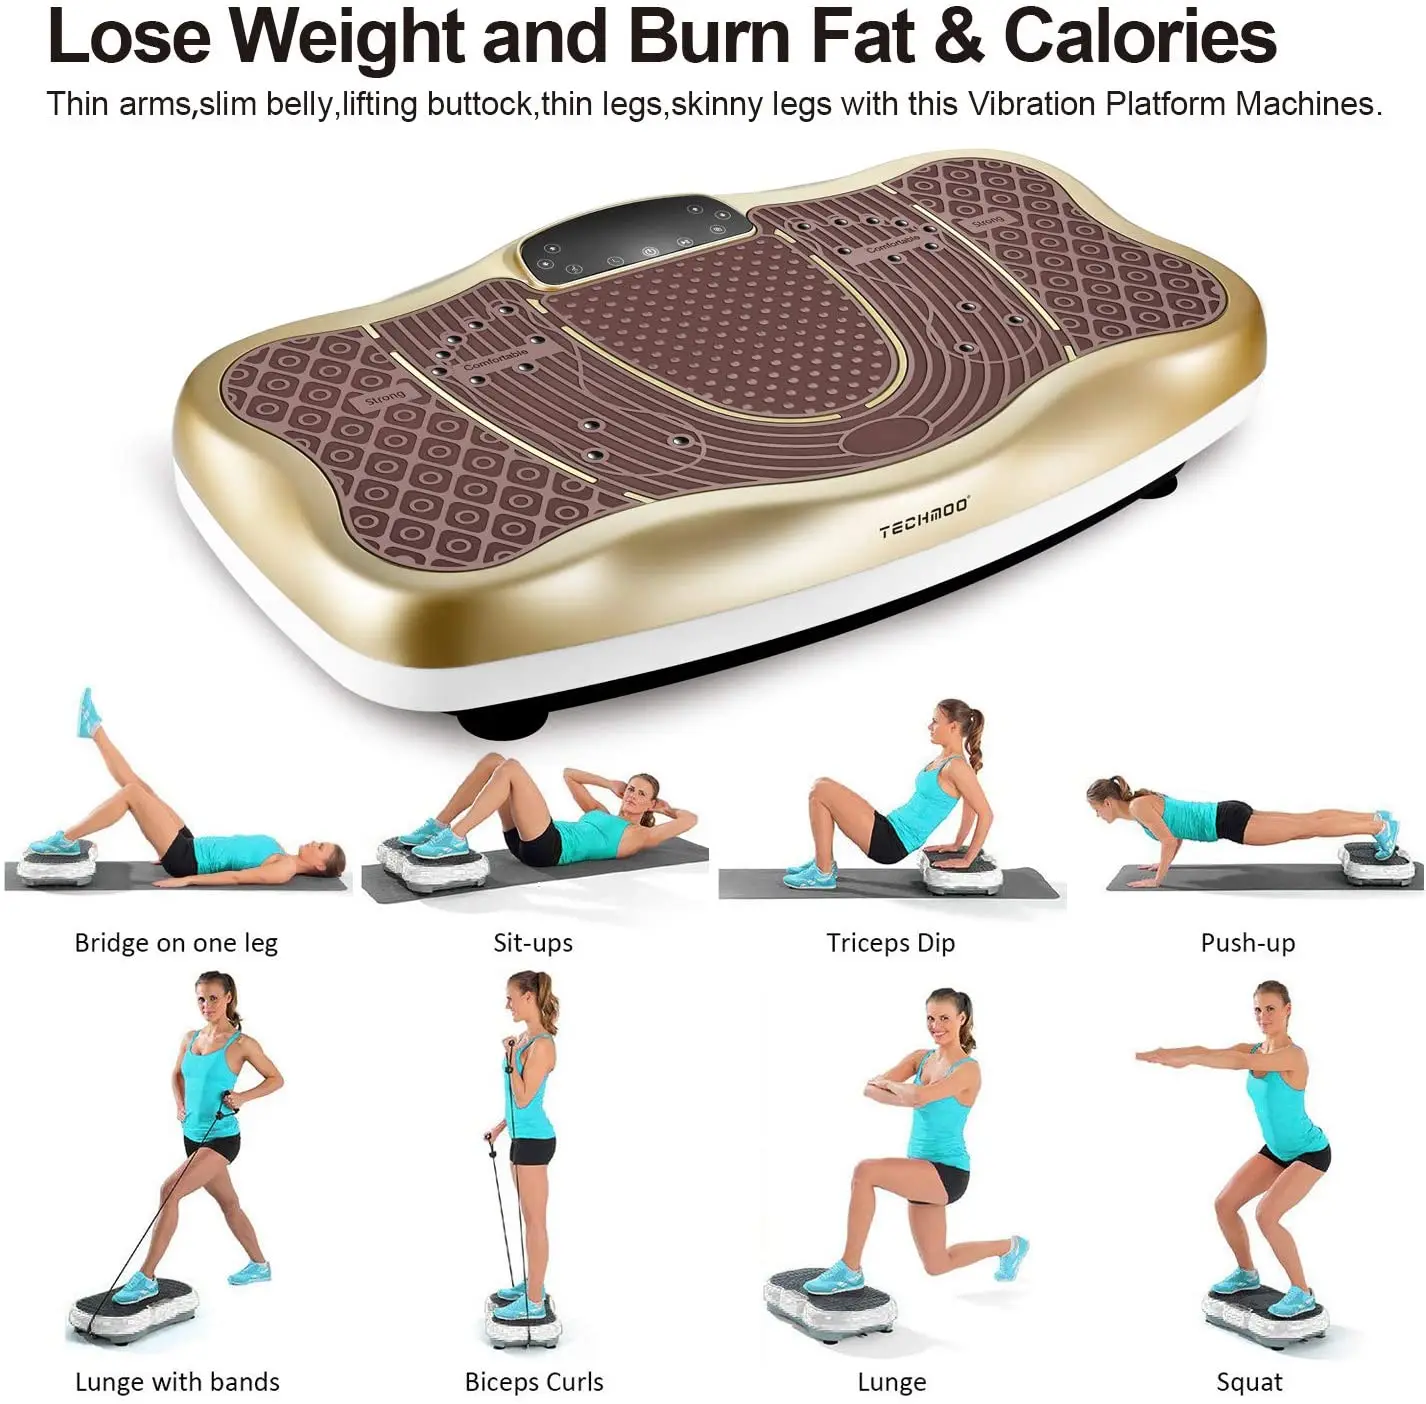 
Electric Slim Whole Health Vibrating Plate Super Body Shaper Vibration Plate Platform for weight lose 